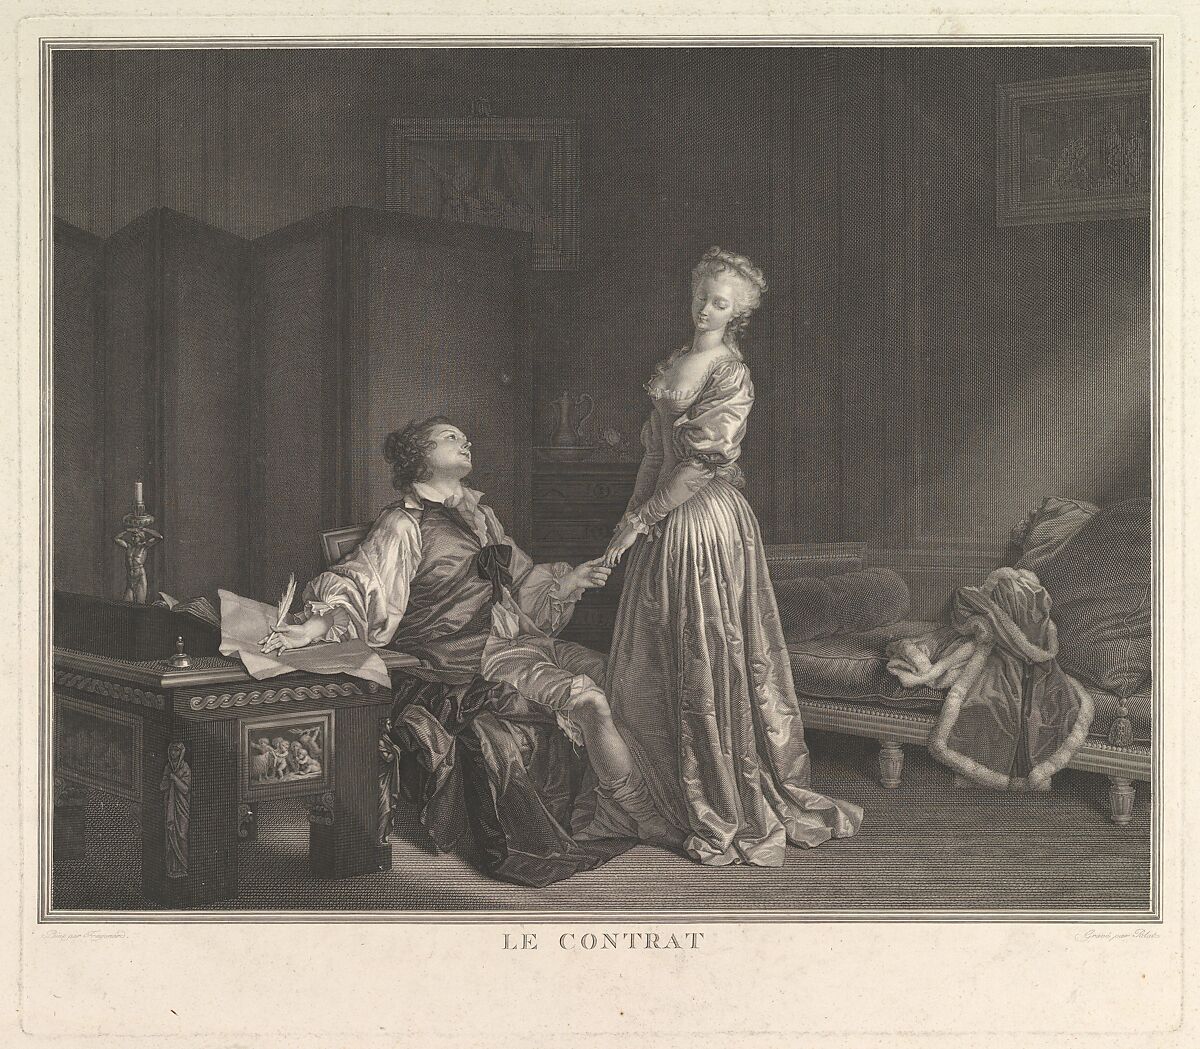 Le Contrat, After Jean Honoré Fragonard (French, Grasse 1732–1806 Paris), Etching, first state 